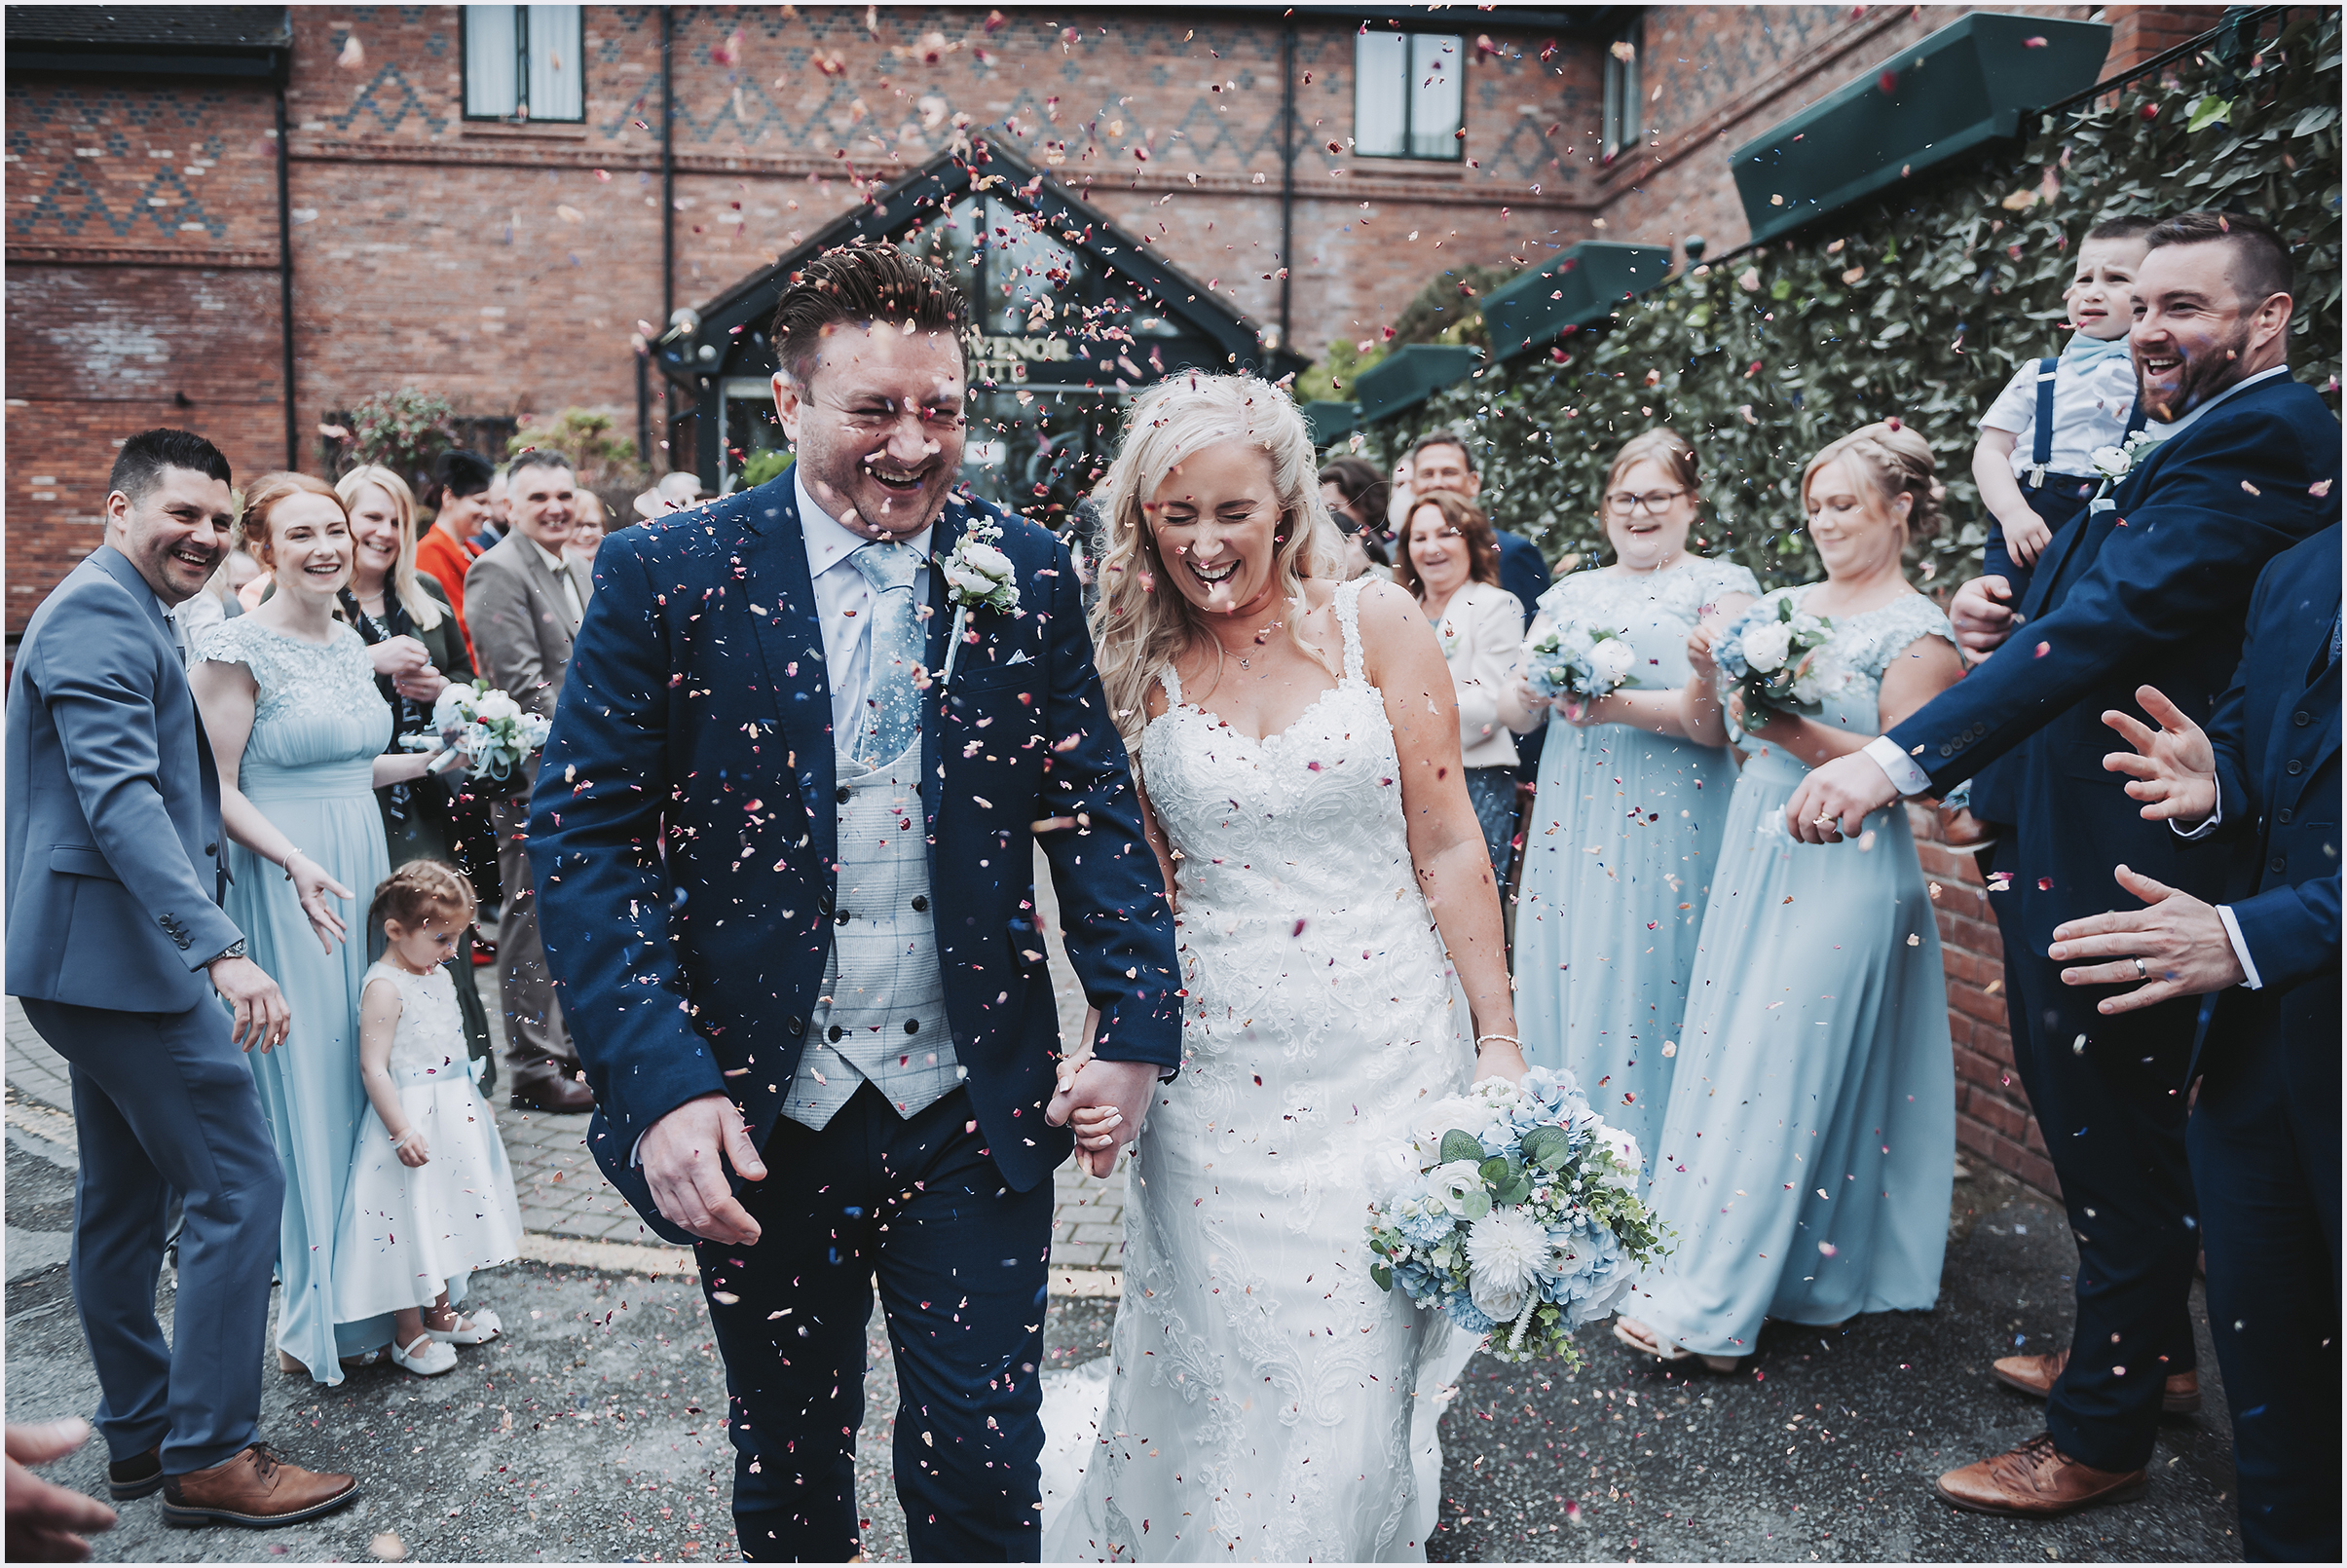 A newly married couple are showered with confetti by their guests after getting married.  Image captured by Cheshire wedding Photogapher Helena Jayne Photographer.